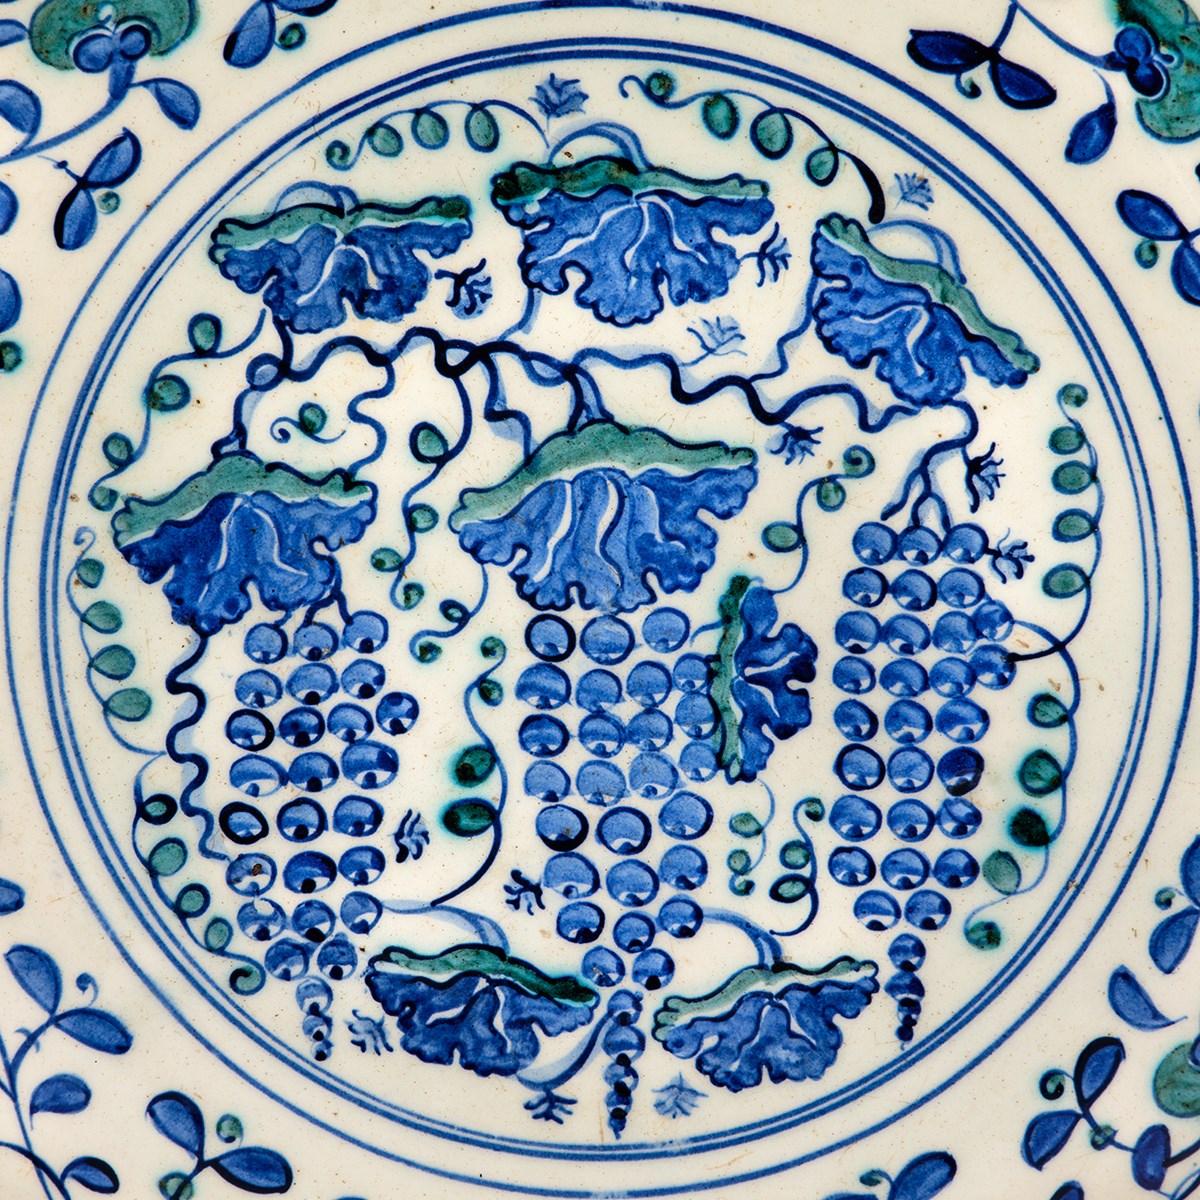 A Large Rimless Iznik Dish Decorated with Grapes